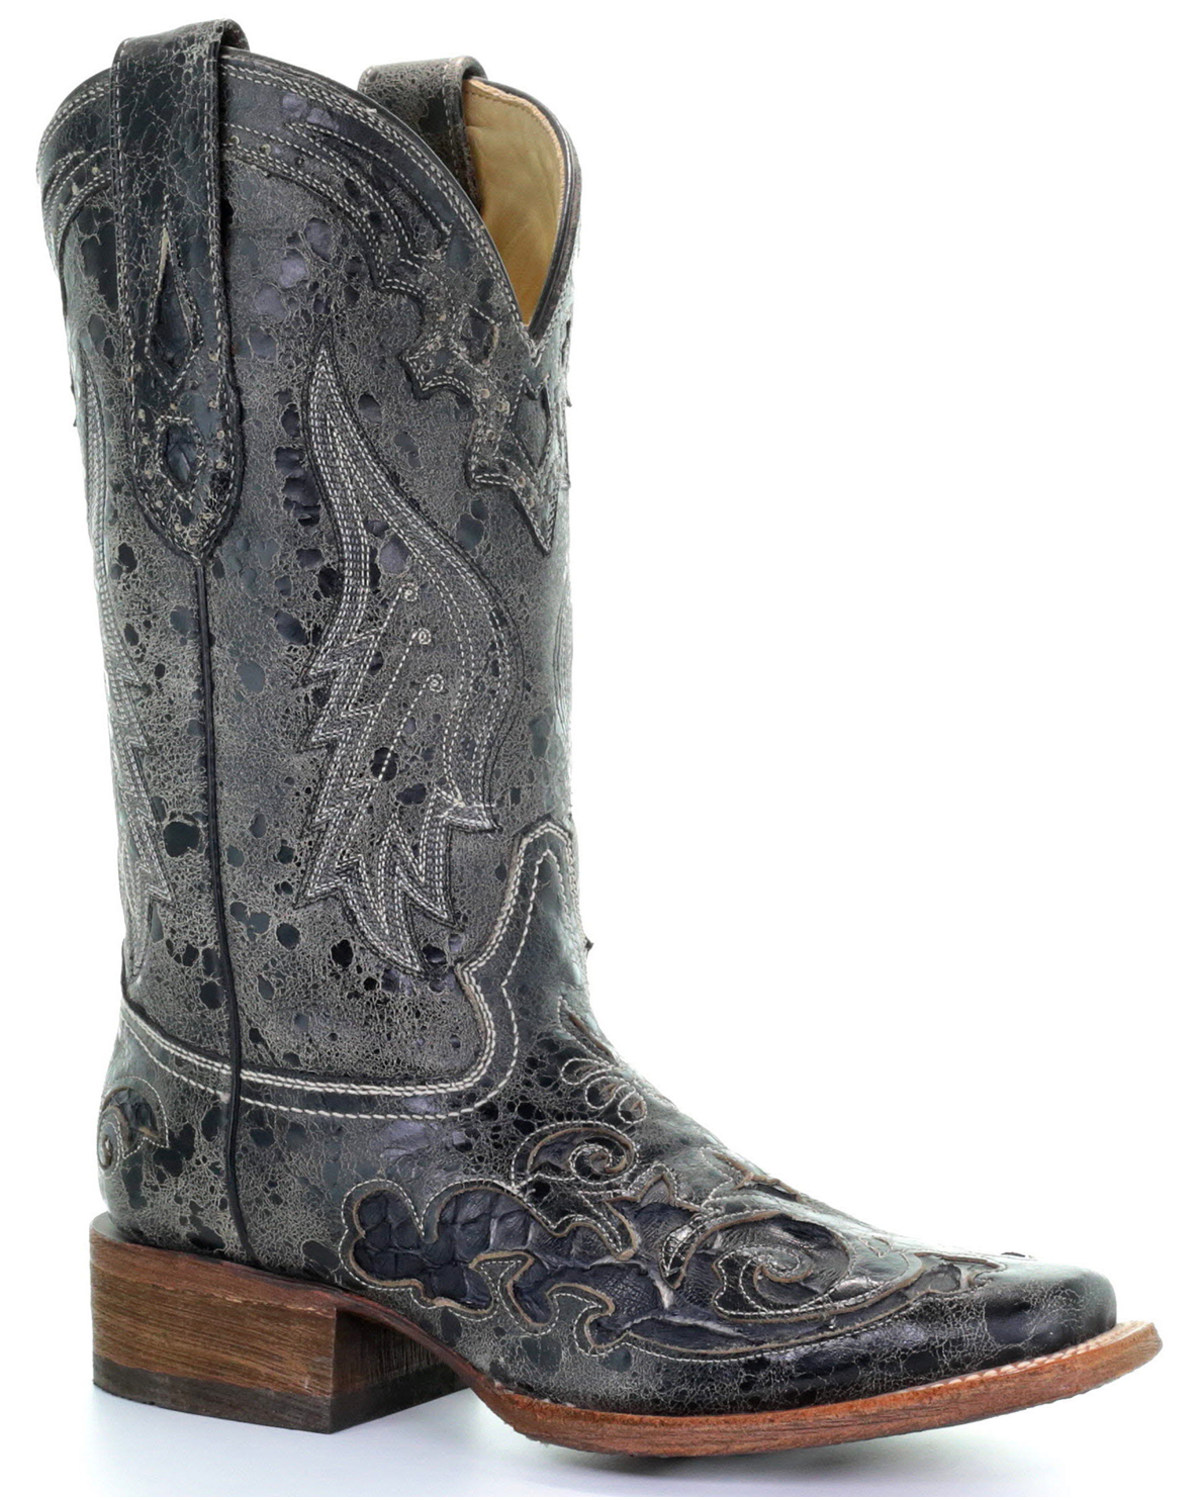 Corral Women's Vintage Python Inlay Western Boots - Square Toe